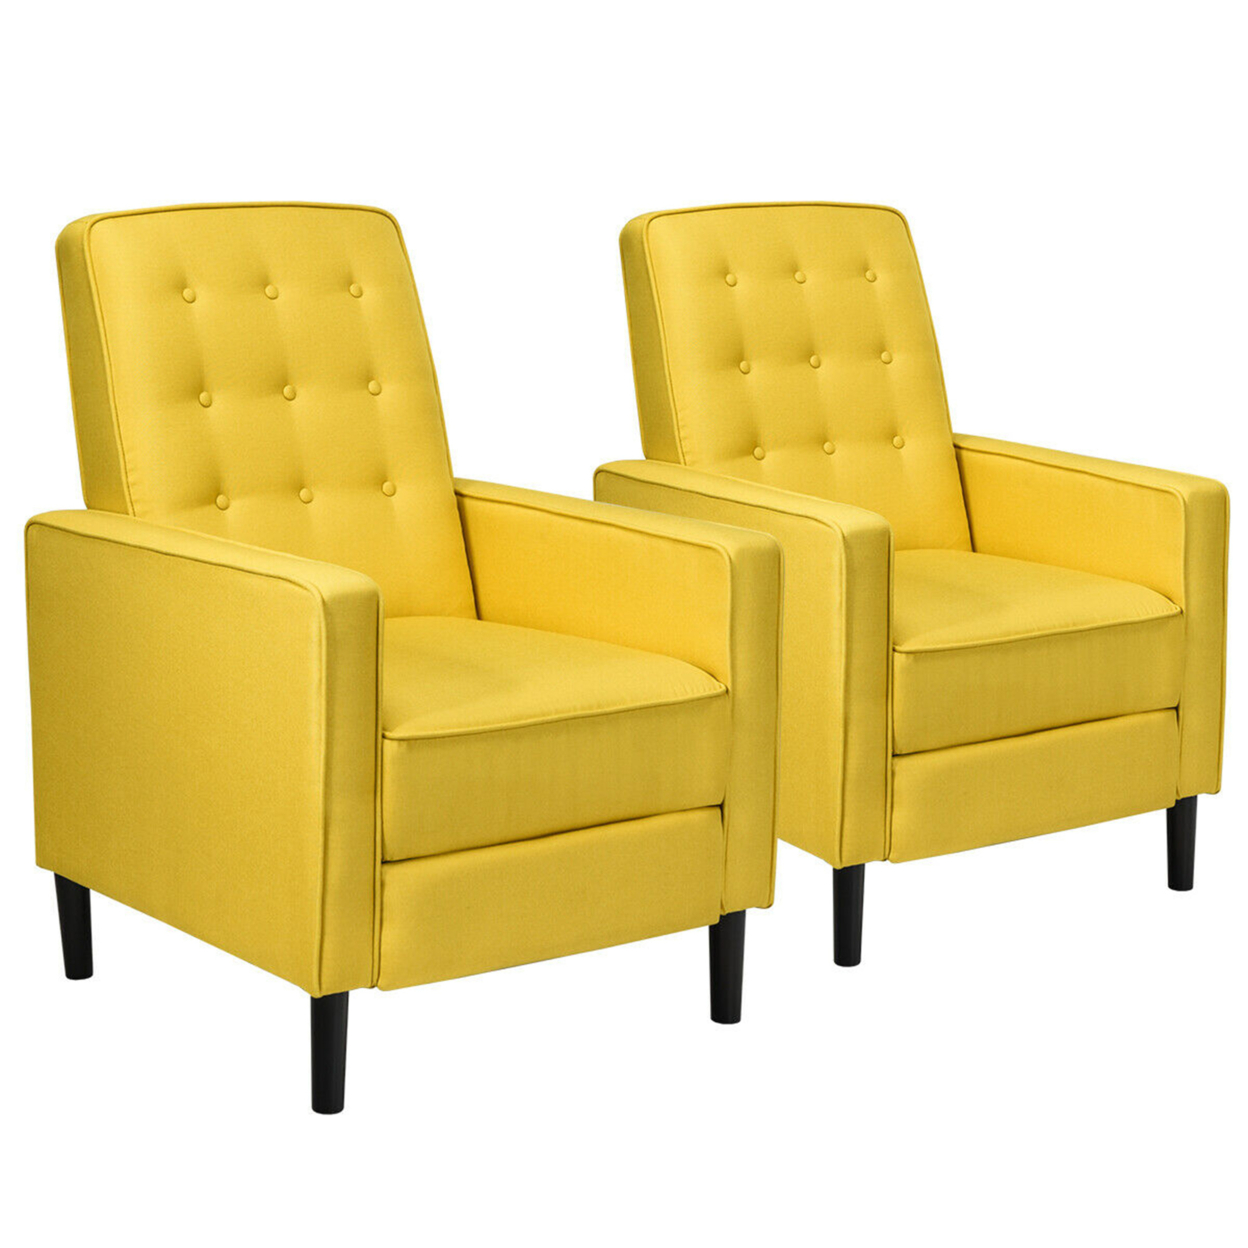 Set Of 2 Push Back Recliner Chair Fabric Tufted Single Sofa W/ Footrest - Yellow